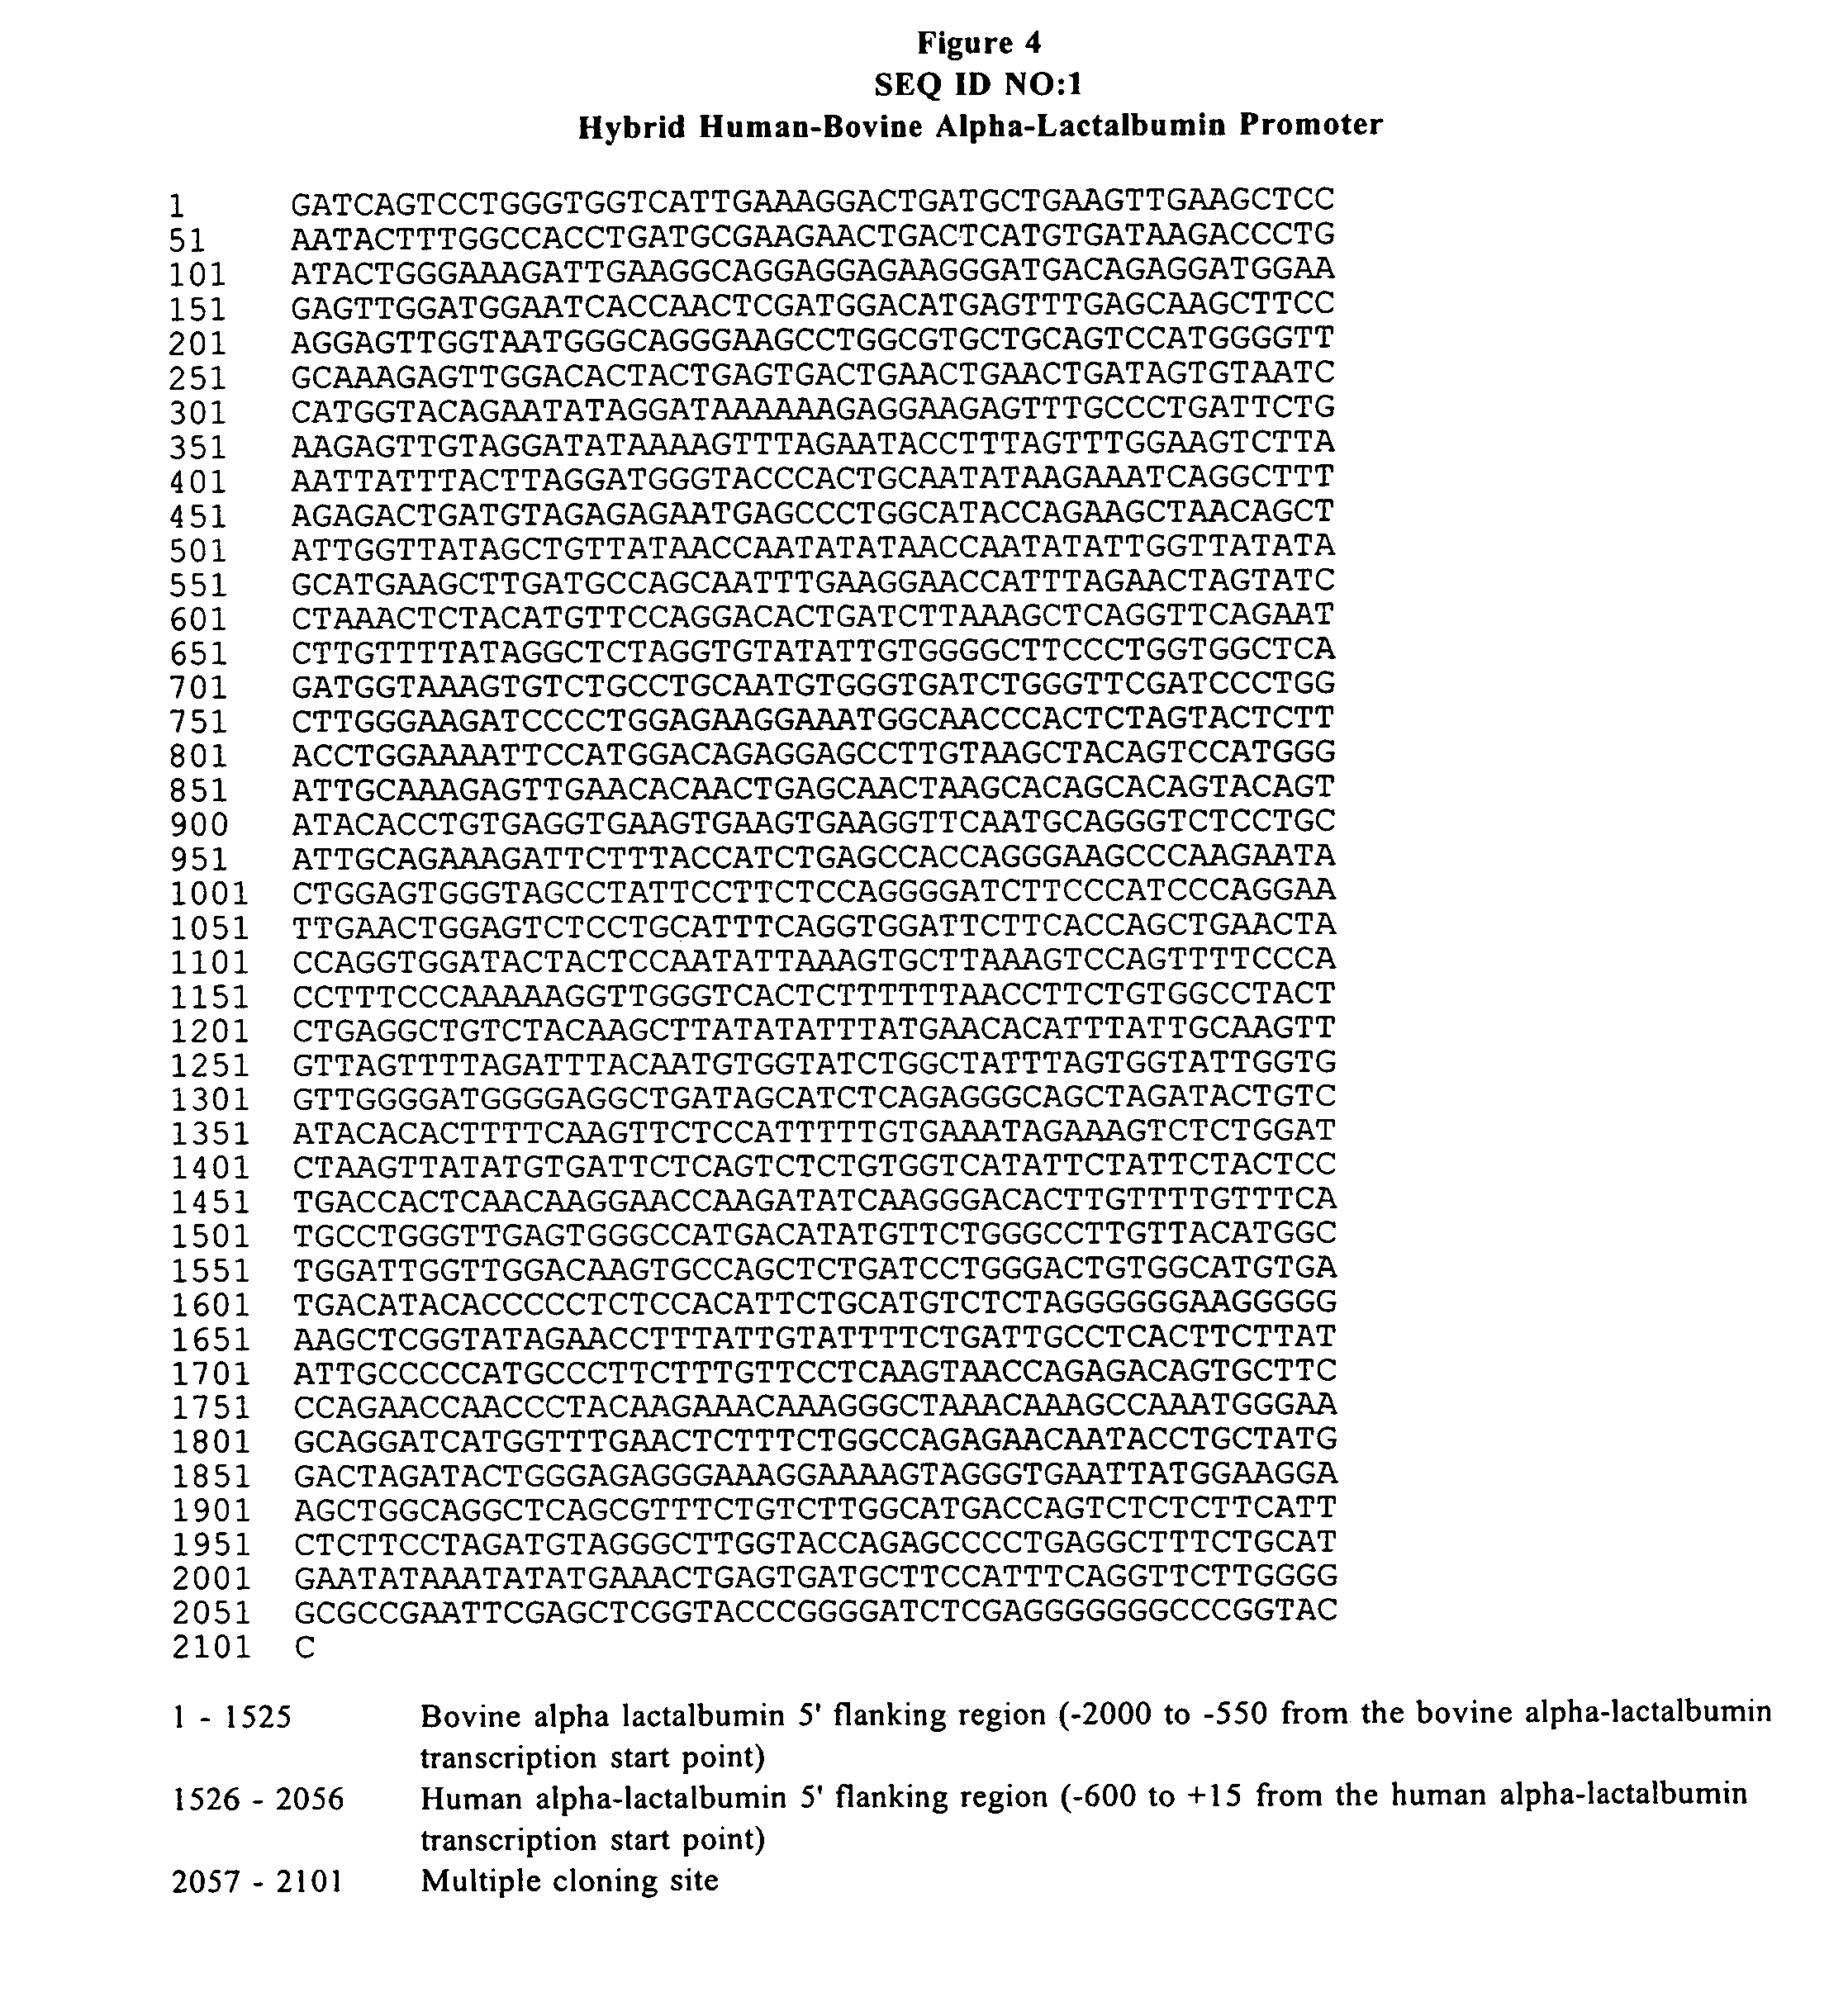 Host cells containing multiple integrating vectors